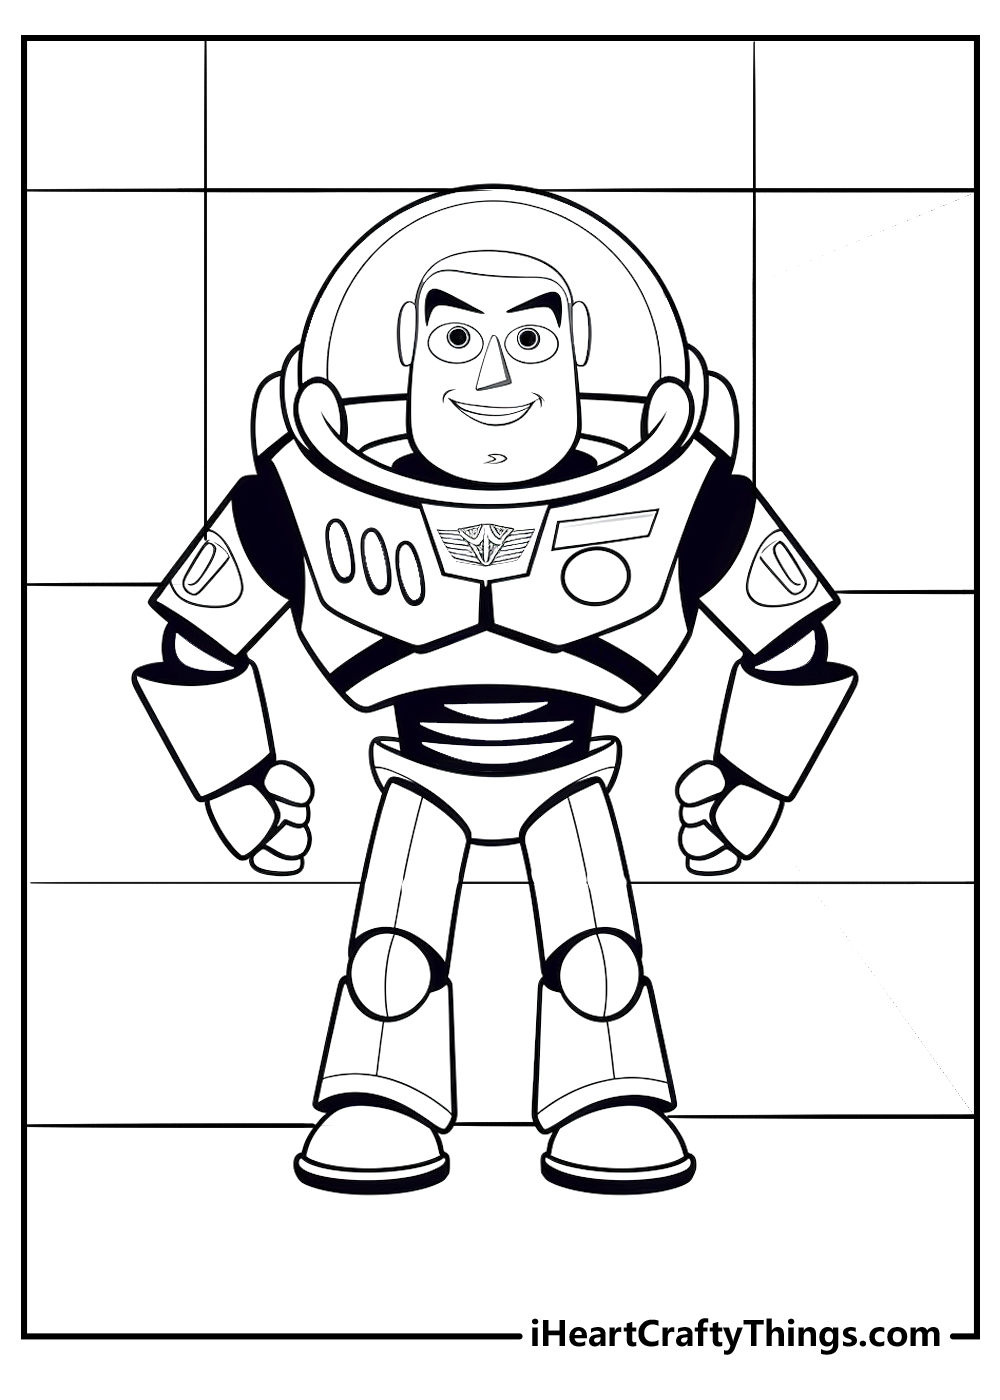 Buzz lightyear coloring pages free printables